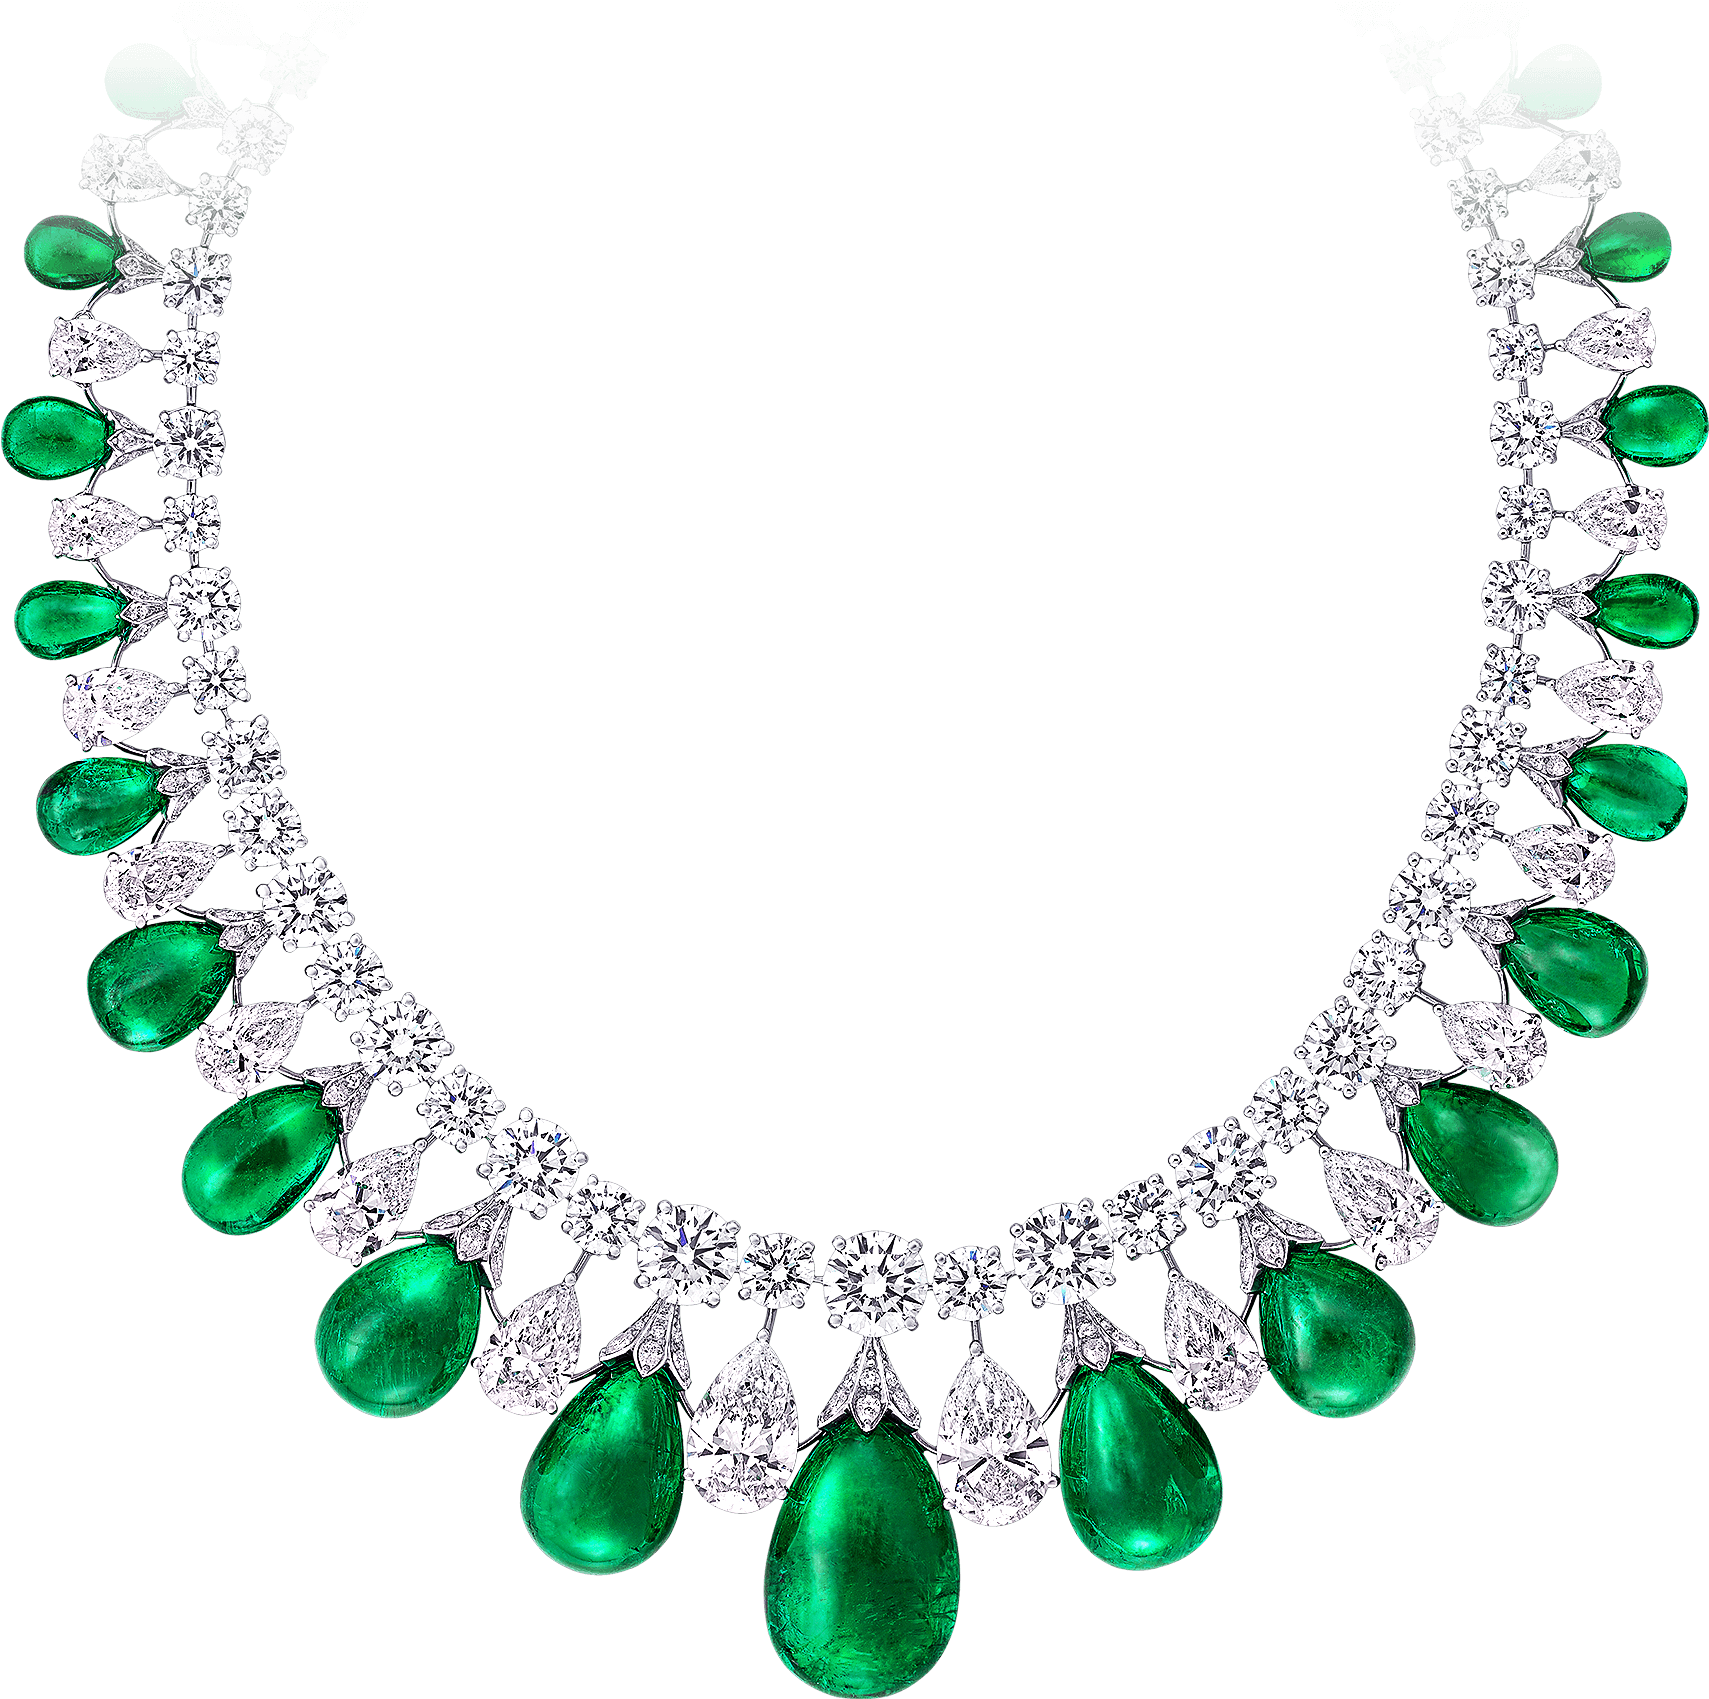 A Necklace With Emeralds And Diamonds